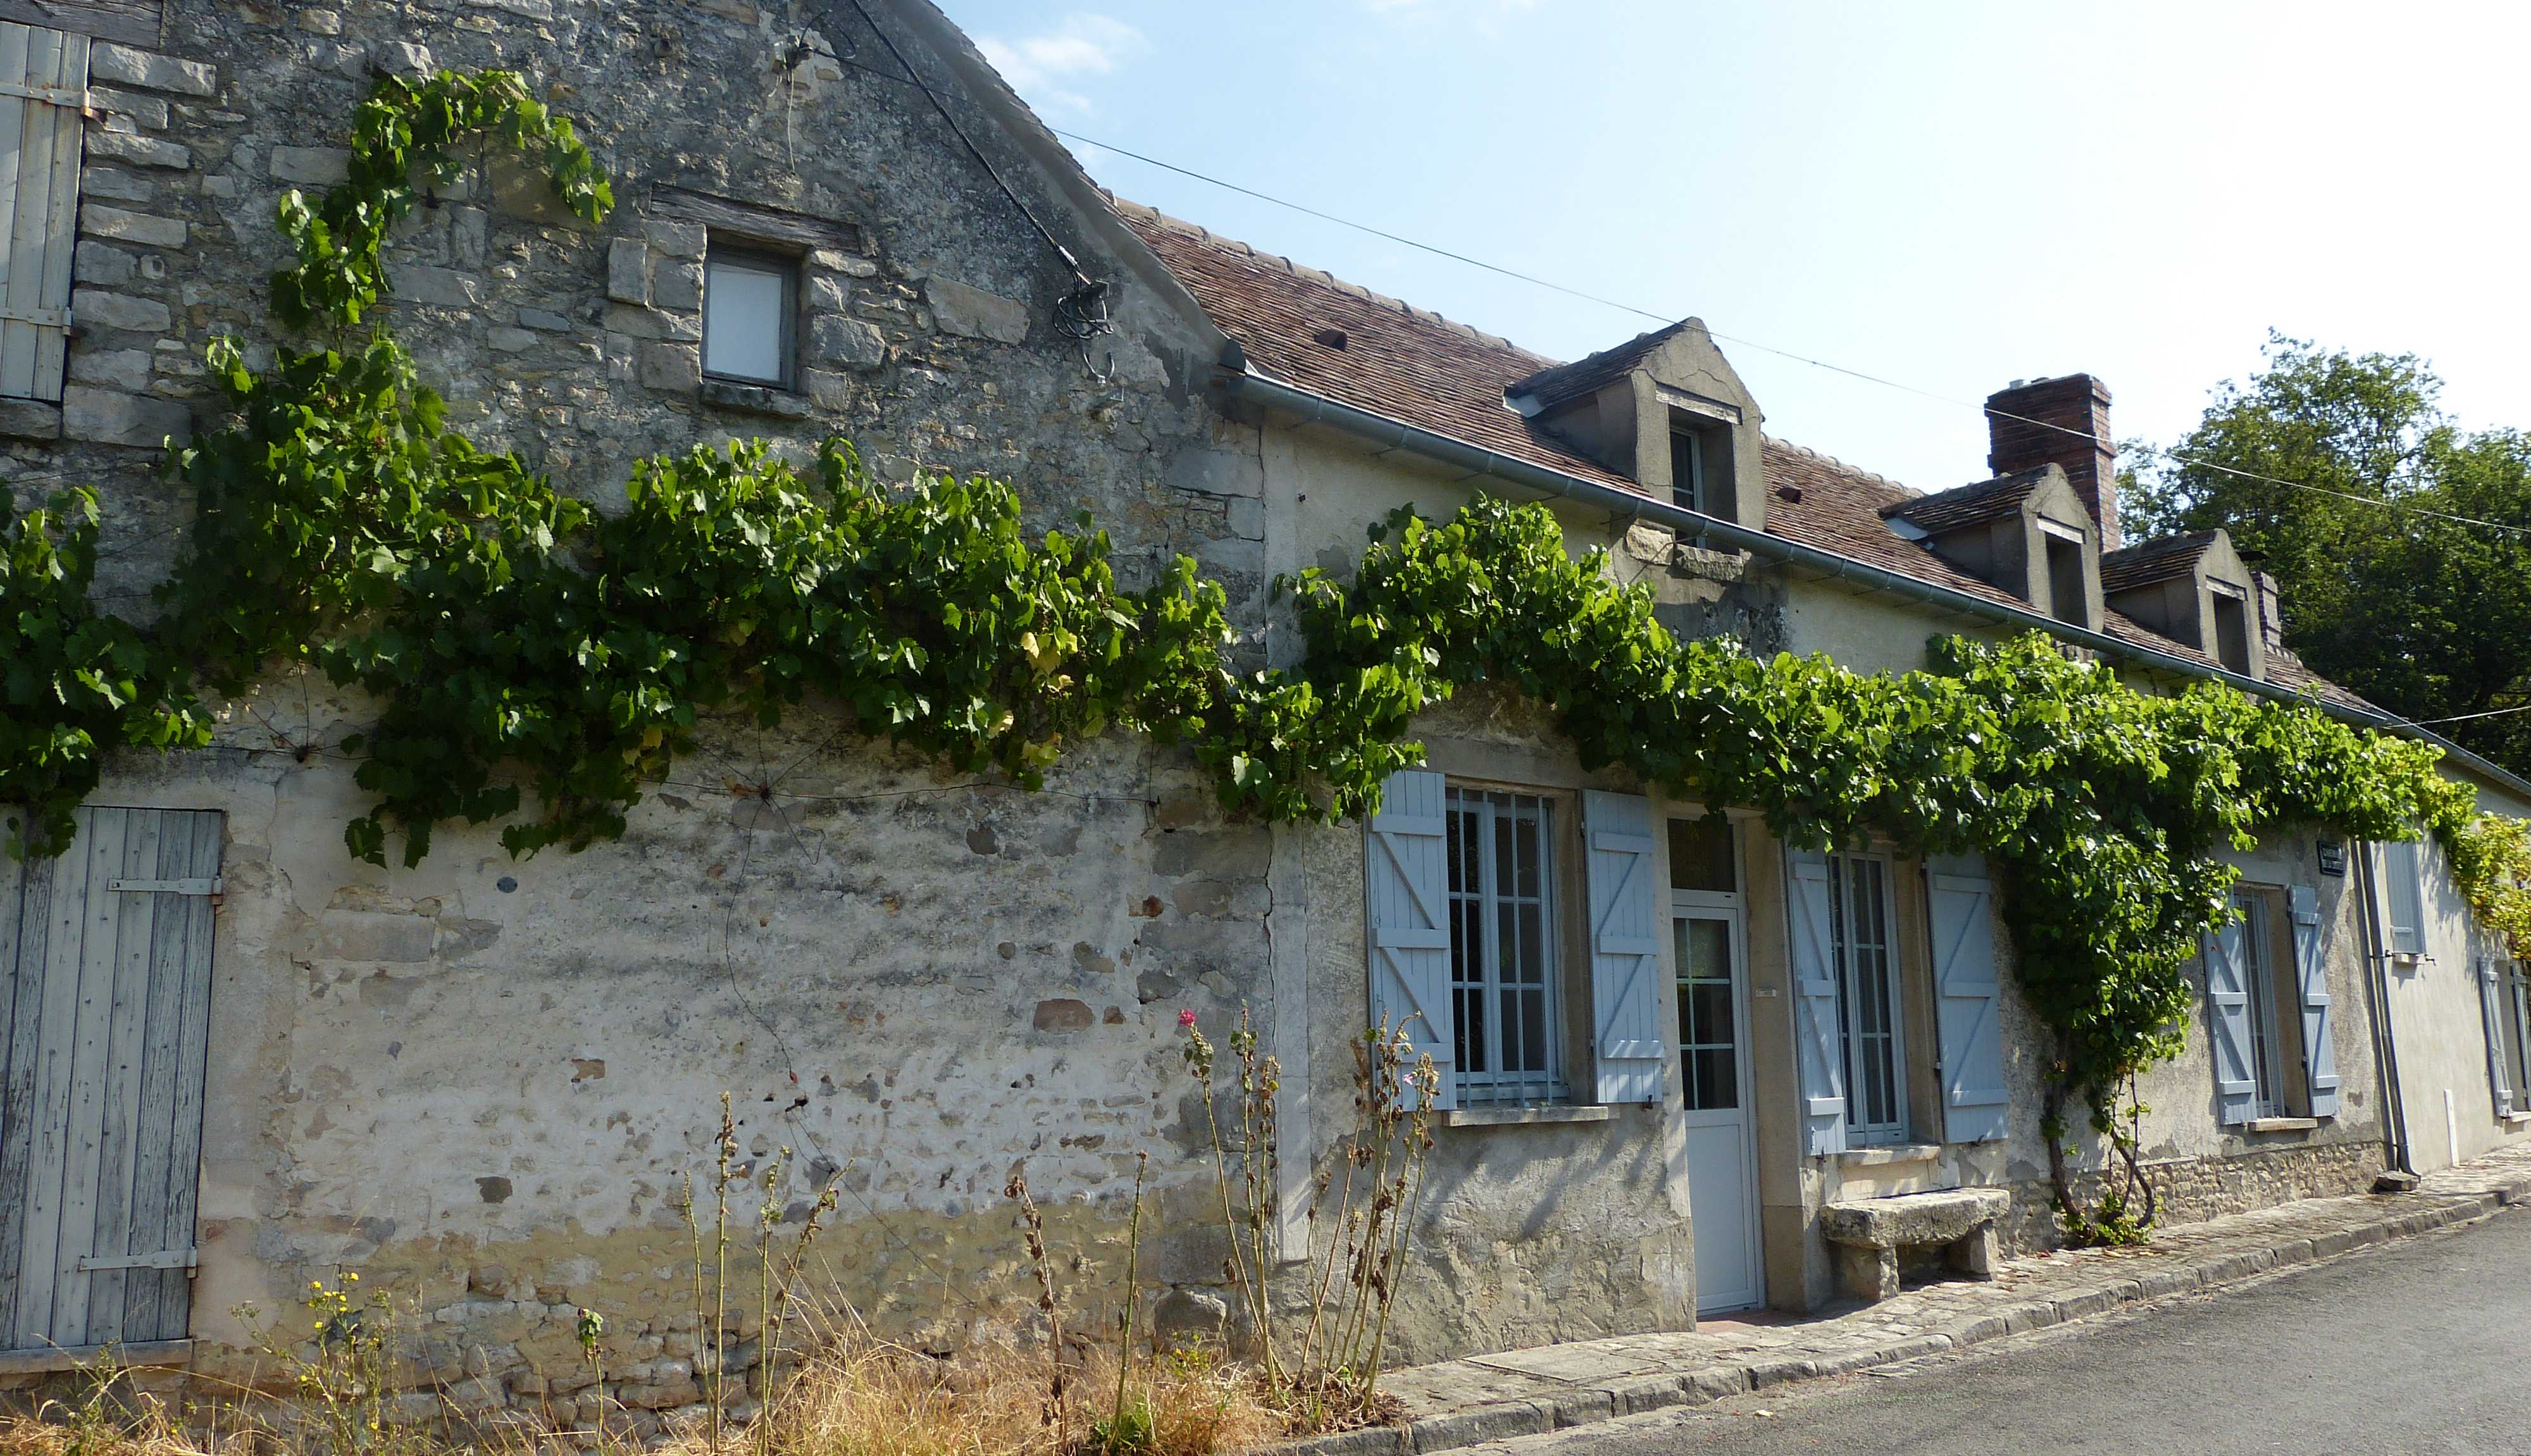 A typical cottage in rural Champagne